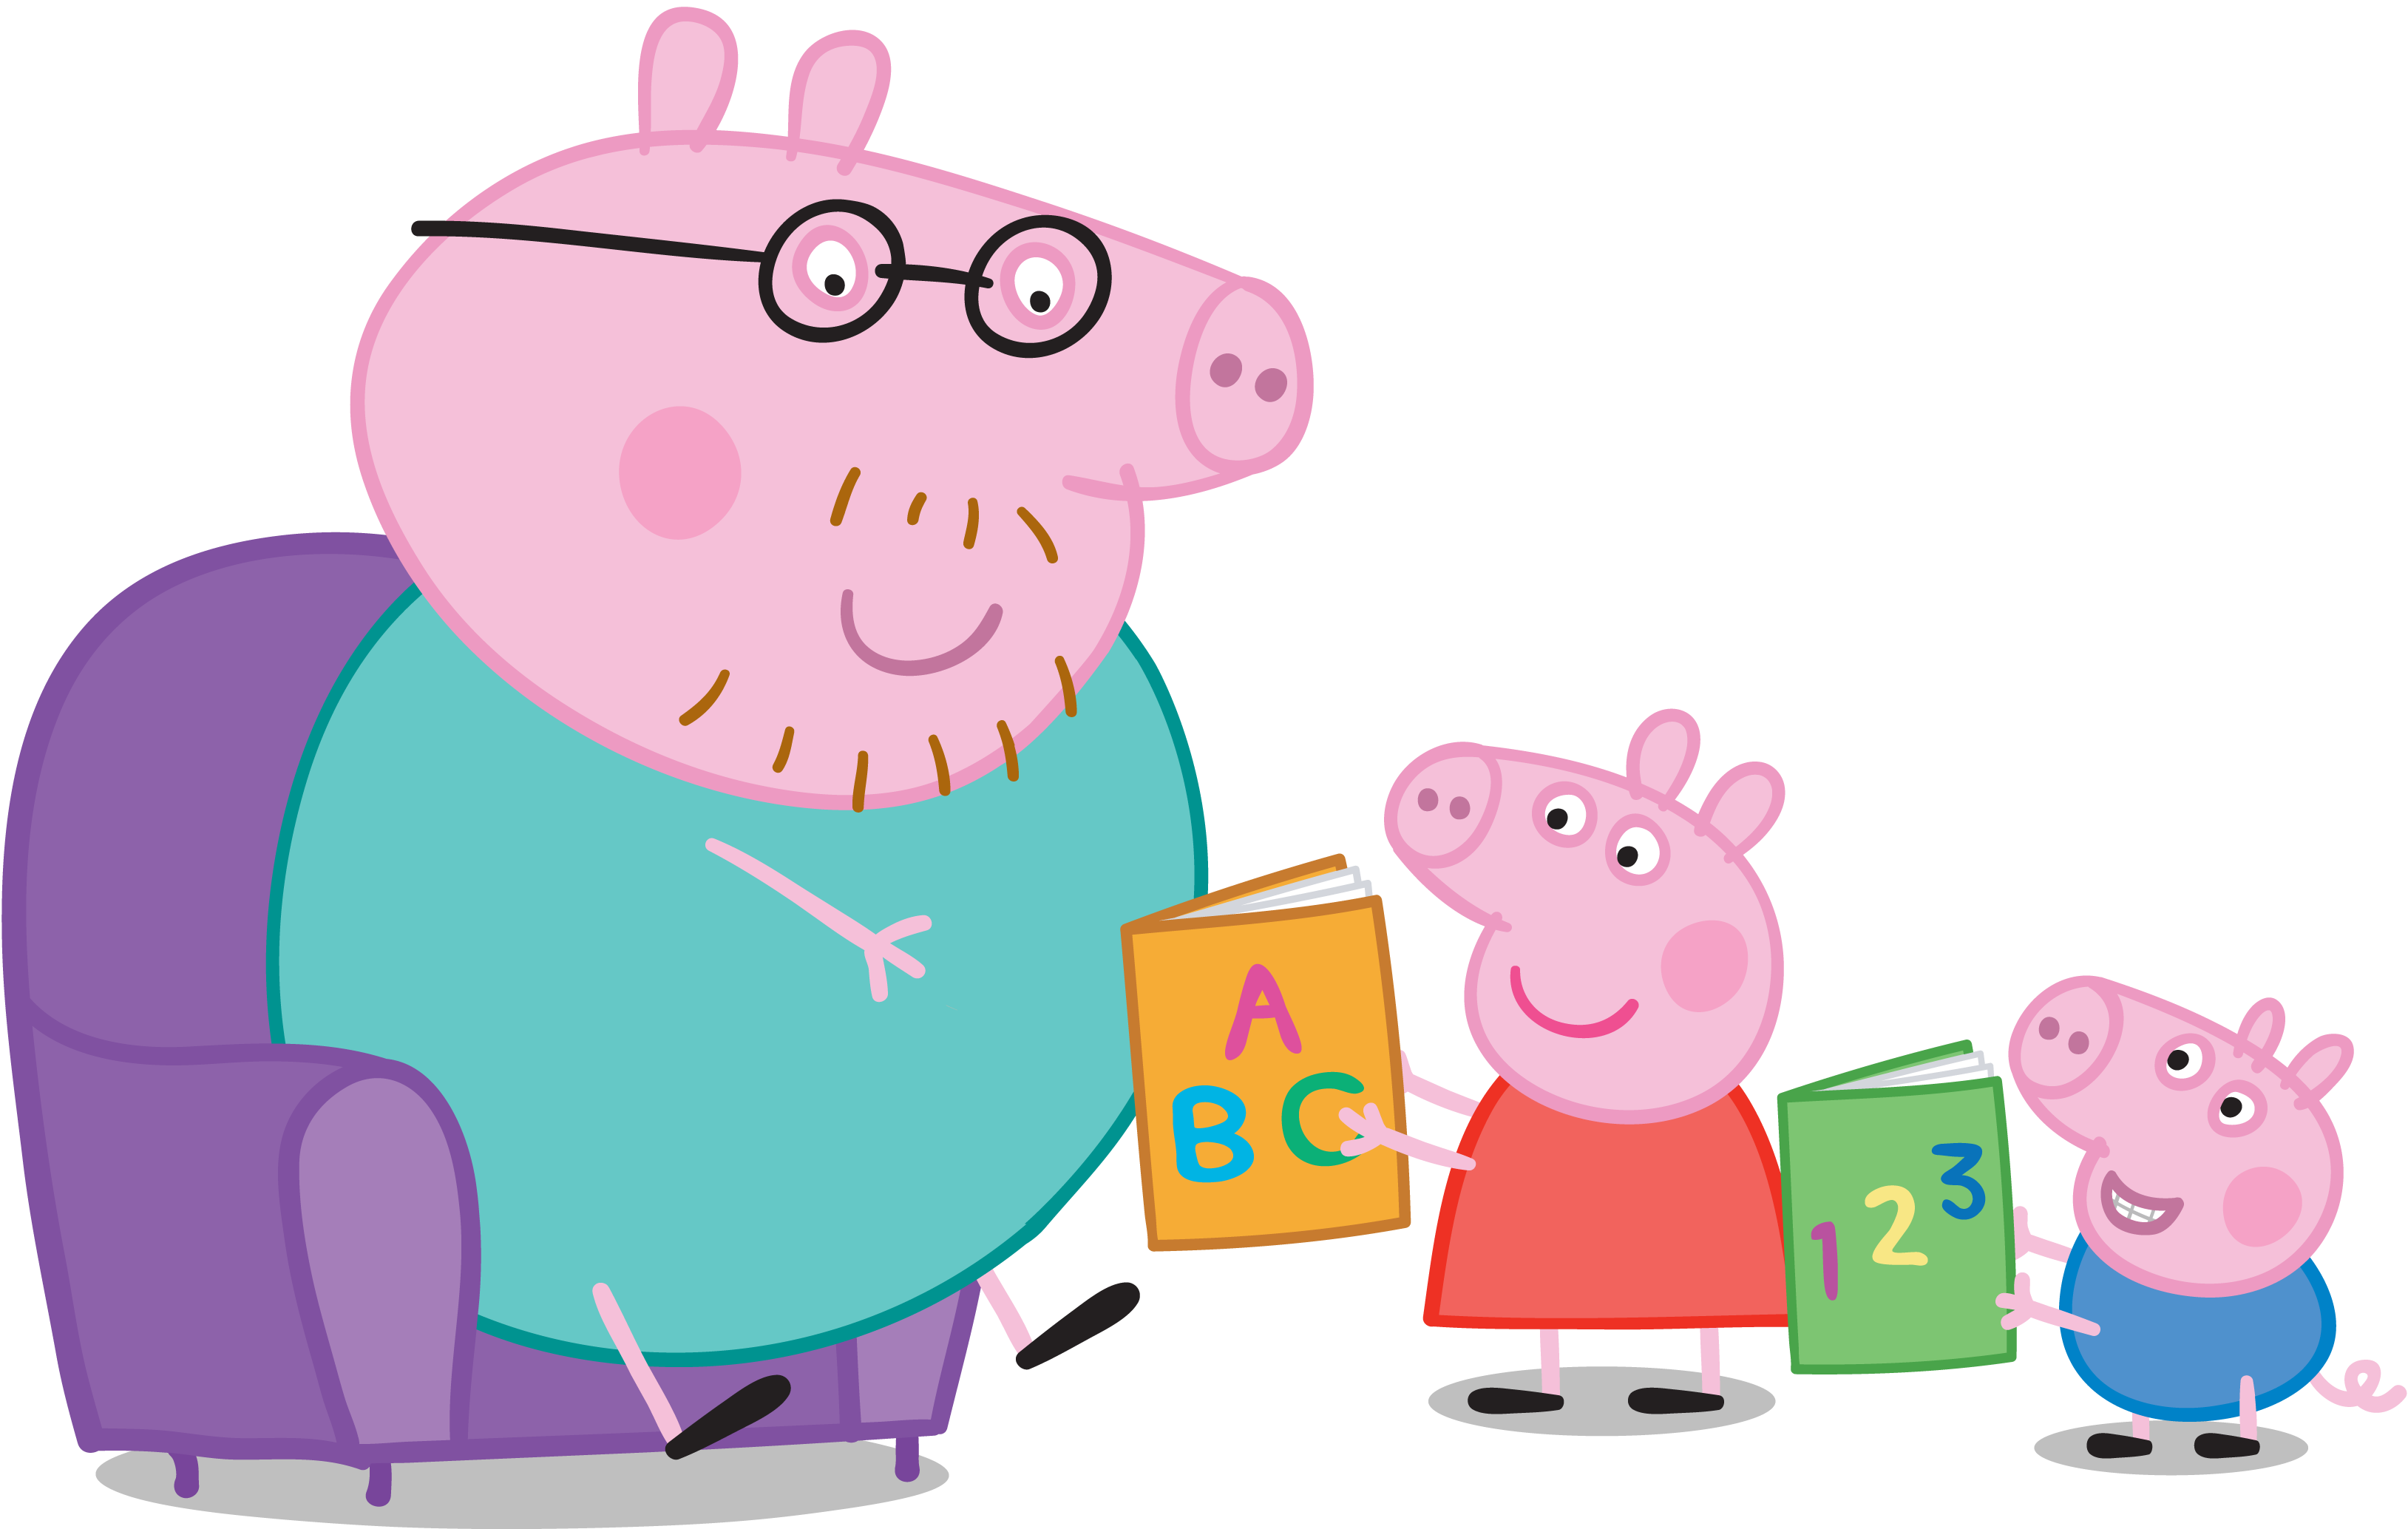 Daddy Pig's top tips for reading